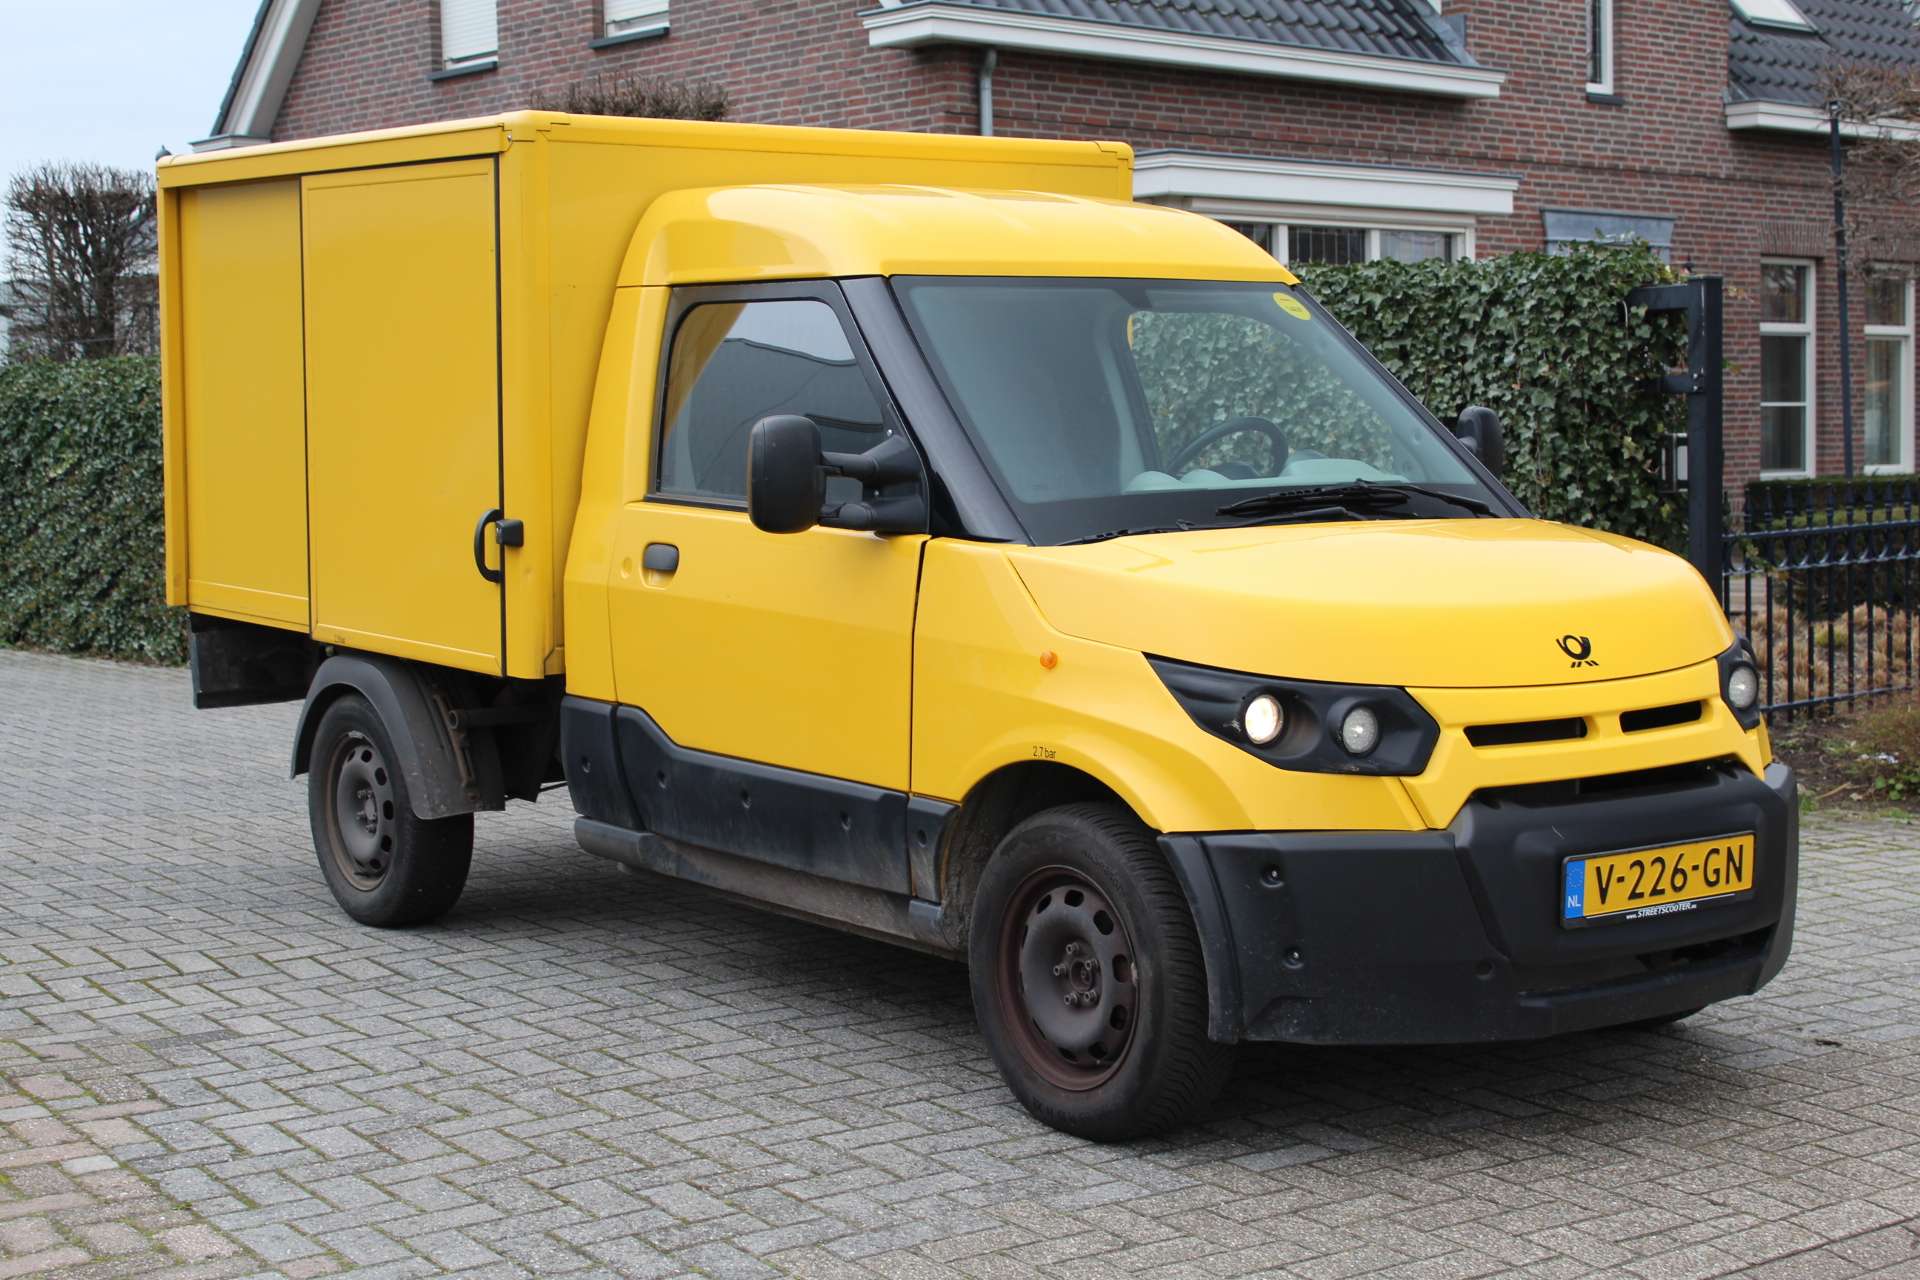 StreetScooter Work Transporter in Yellow used in BEEK EN DONK for € 5,250.-